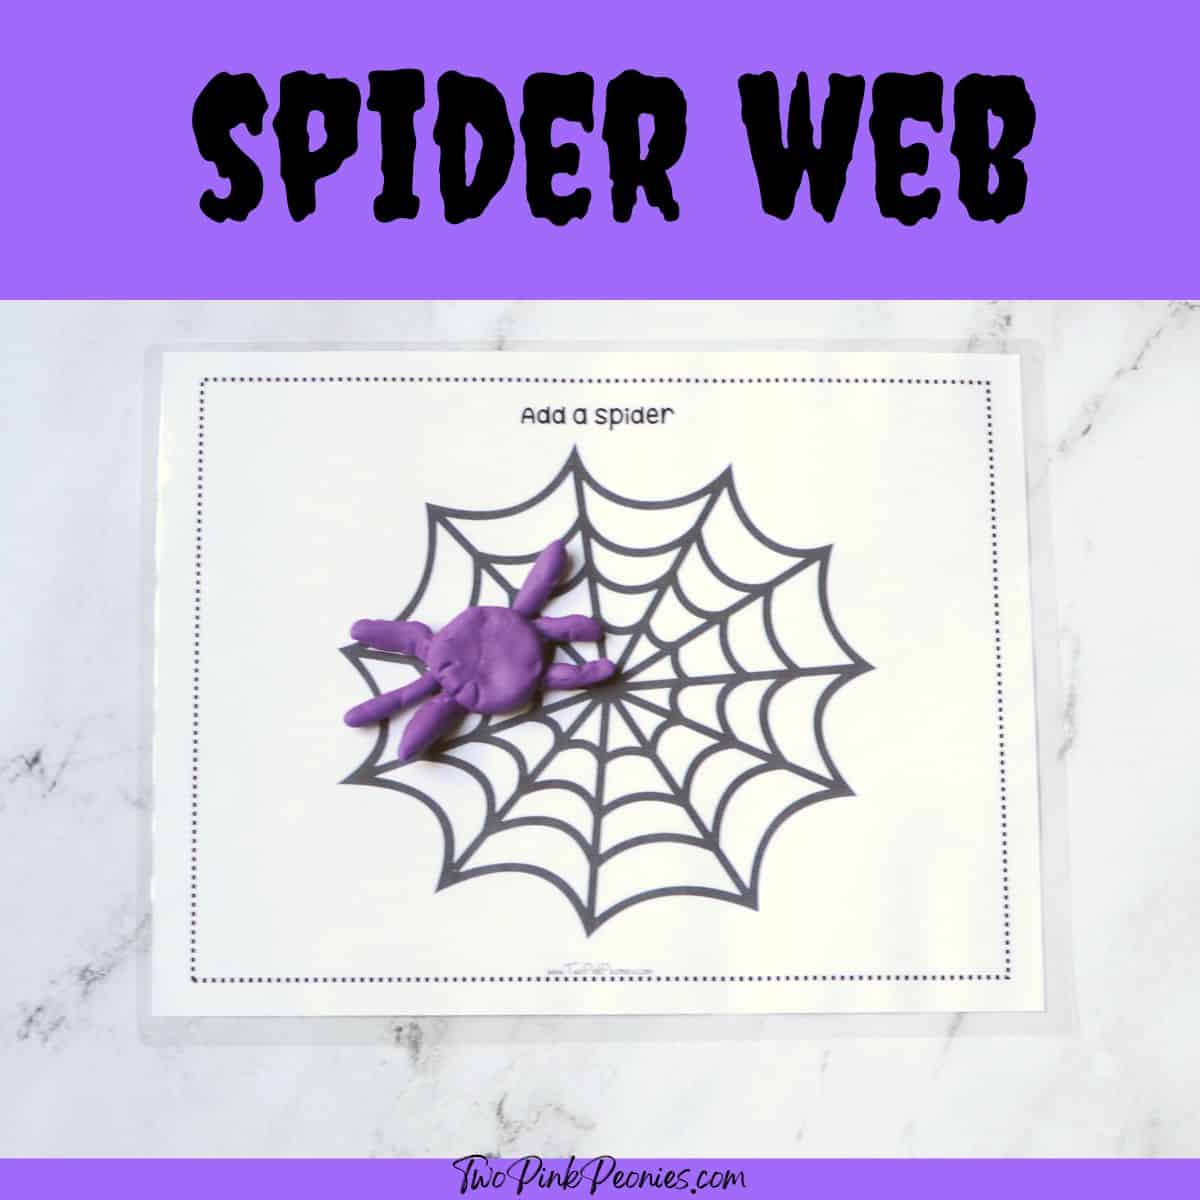 text that says spider web below is an image of the spider web play dough mat